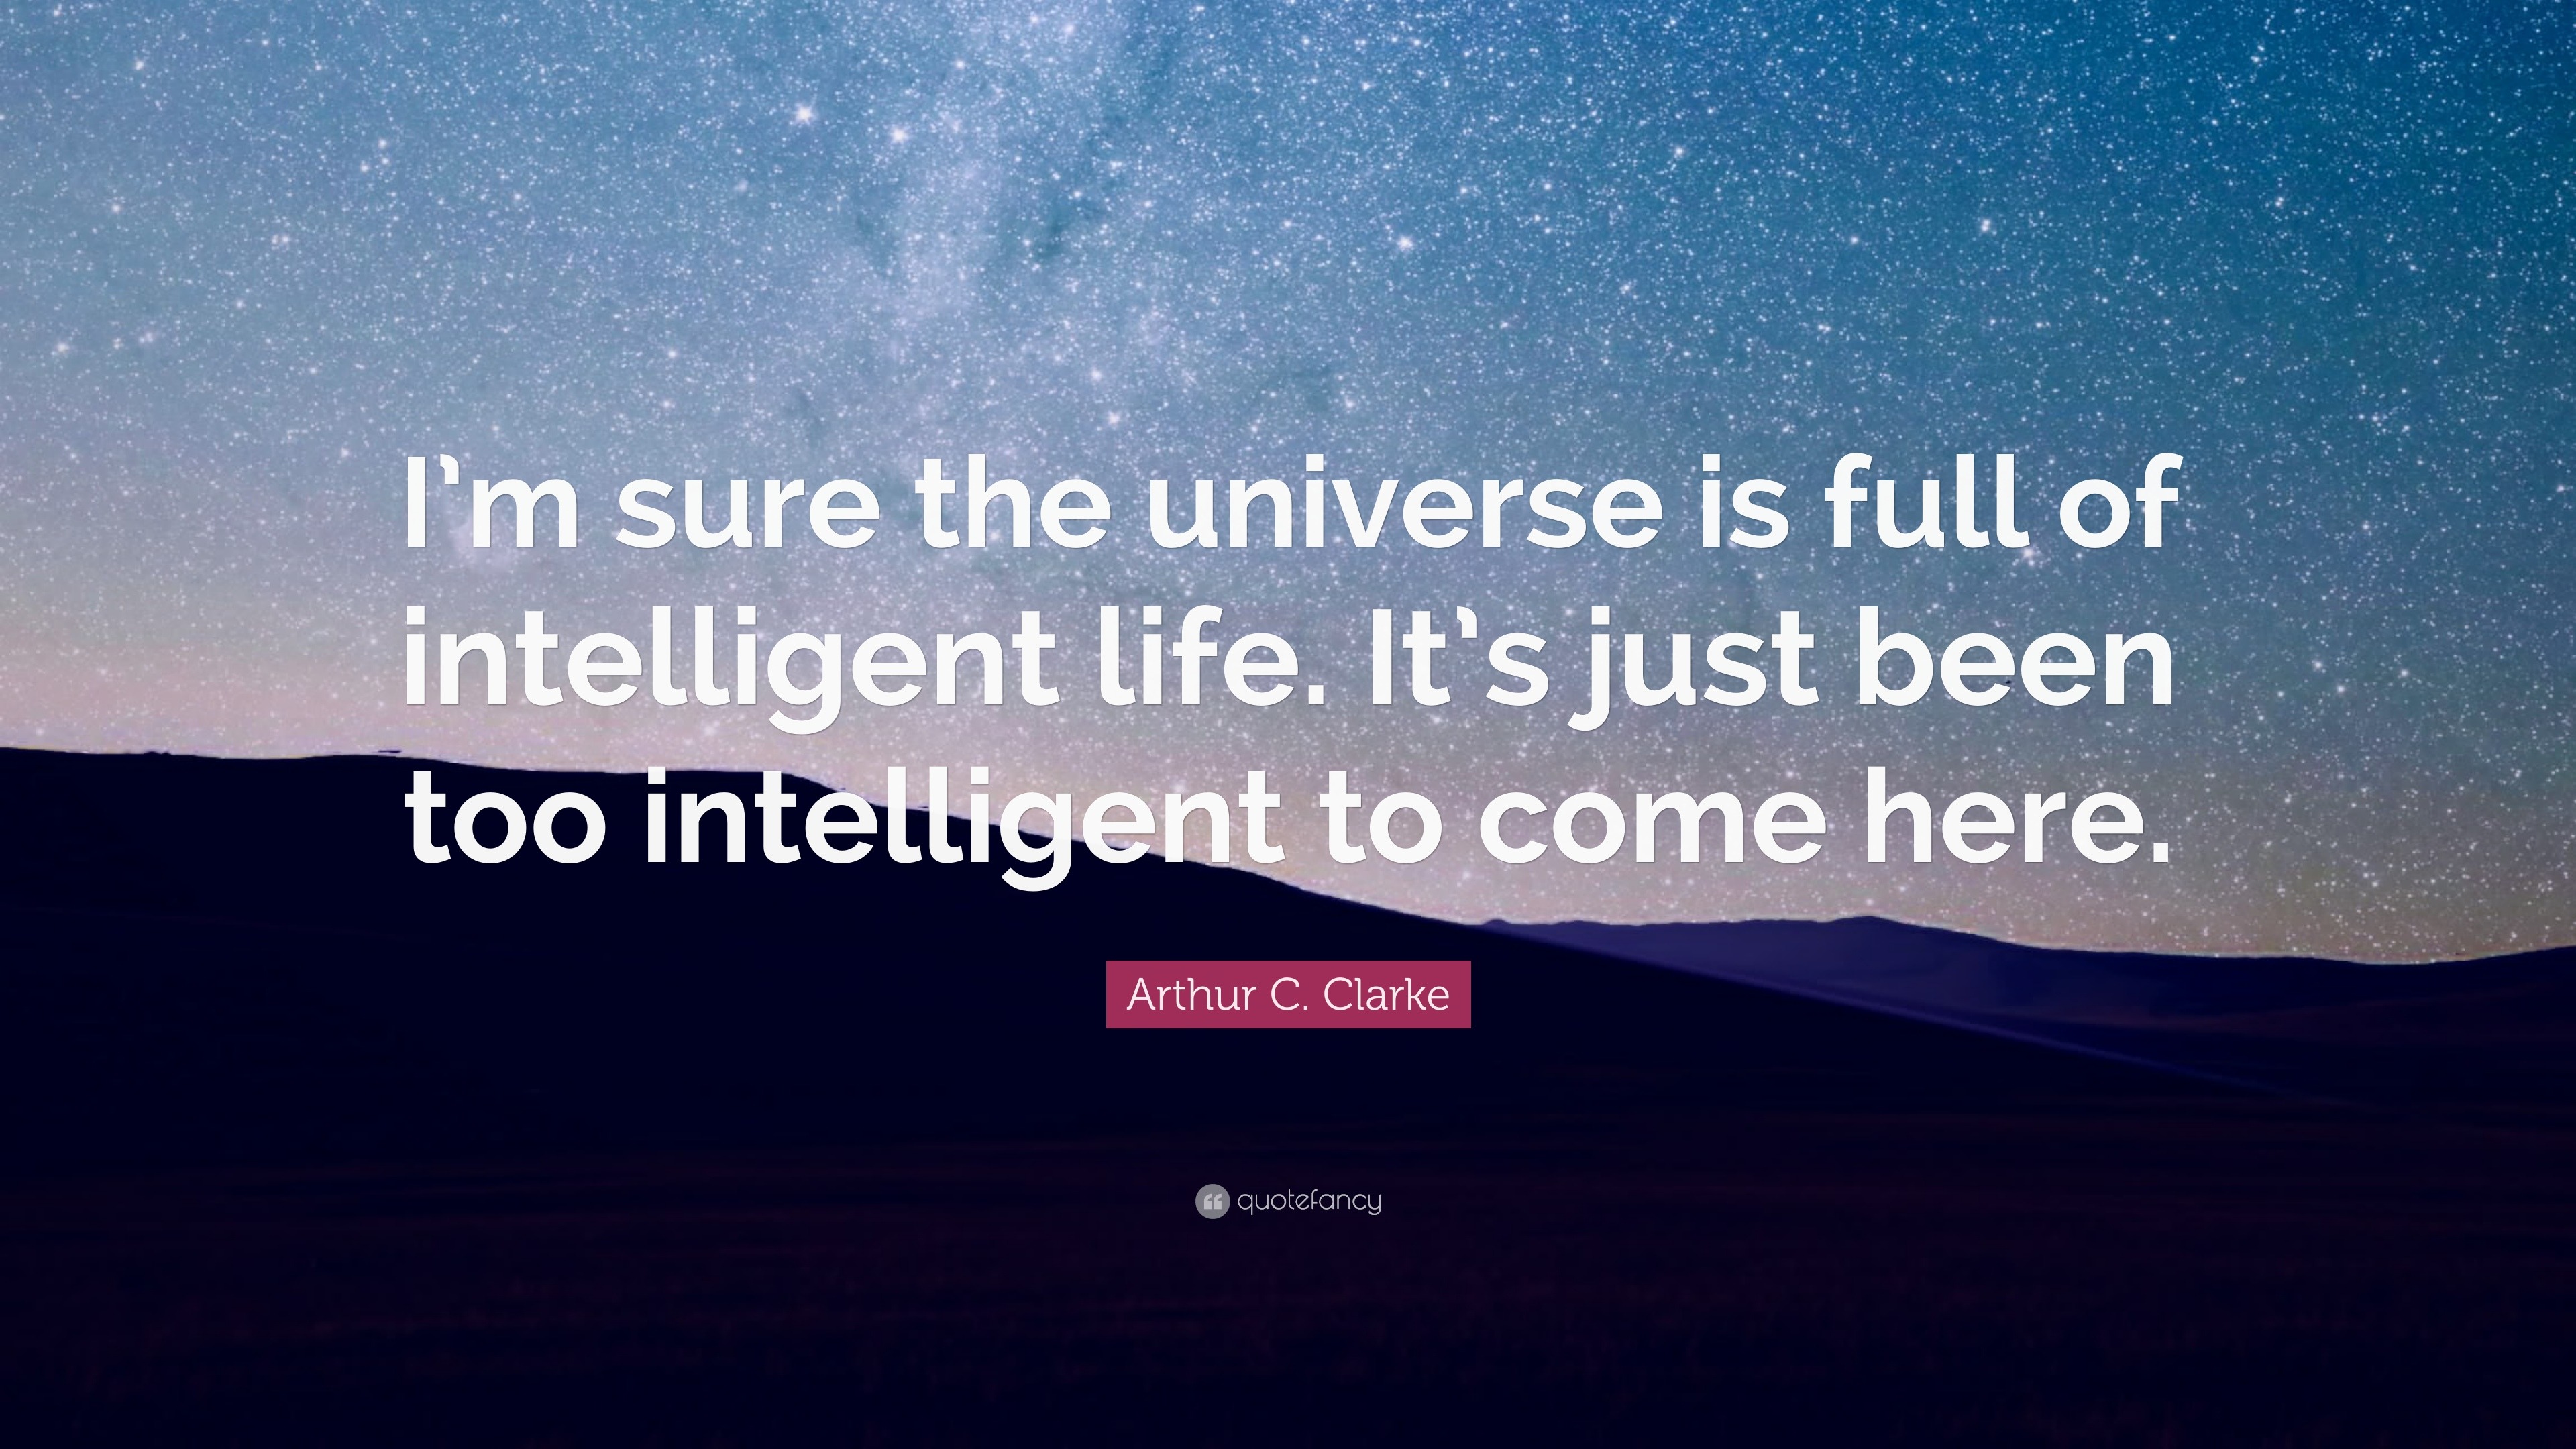 Intelligent Quotes “I m sure the universe is full of intelligent life